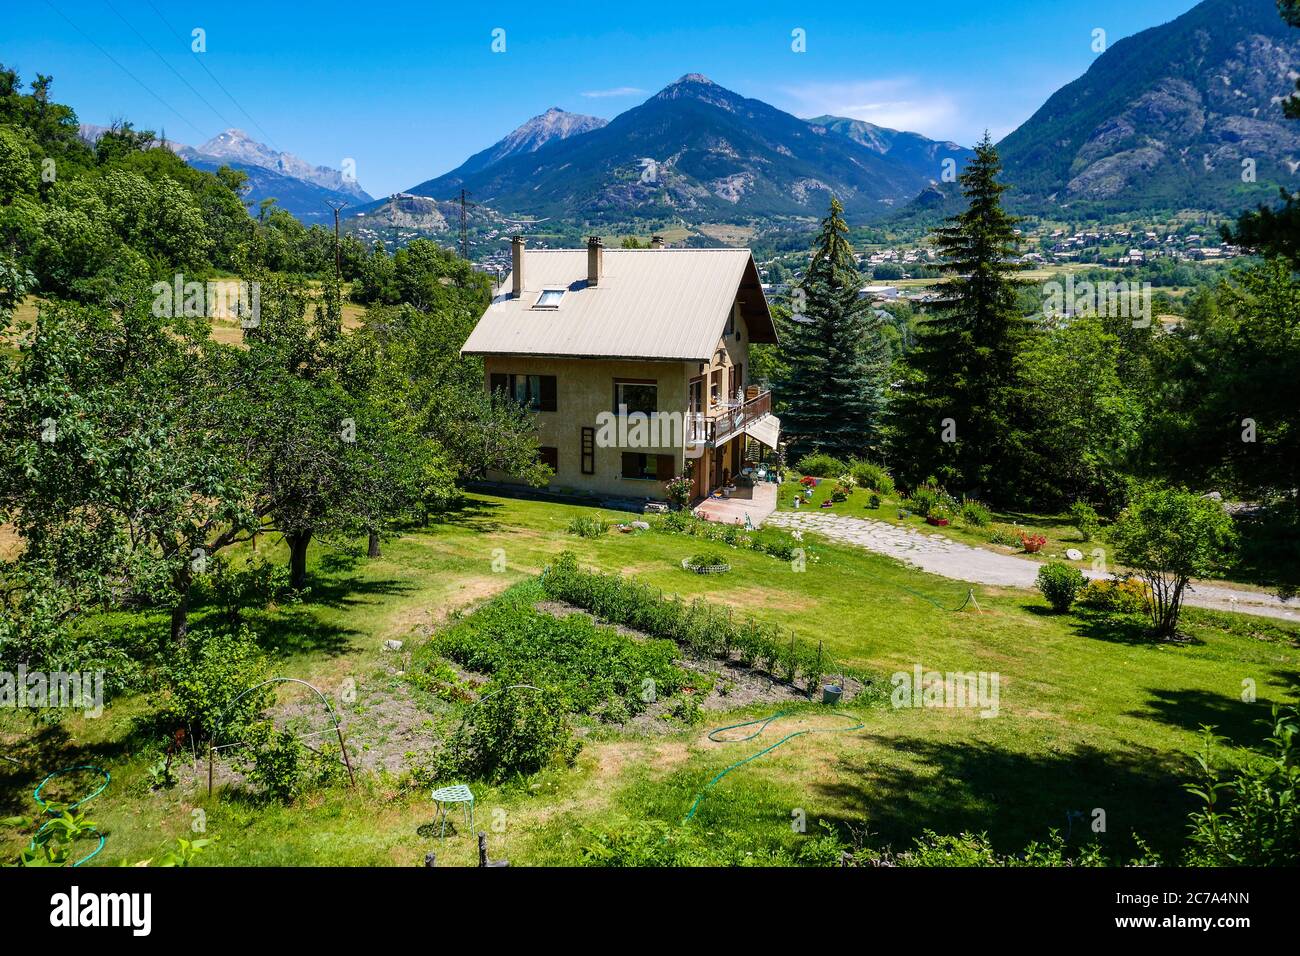 Large house with vegetable garden and fruit trees, Briancon, Ecrins, France Stock Photo